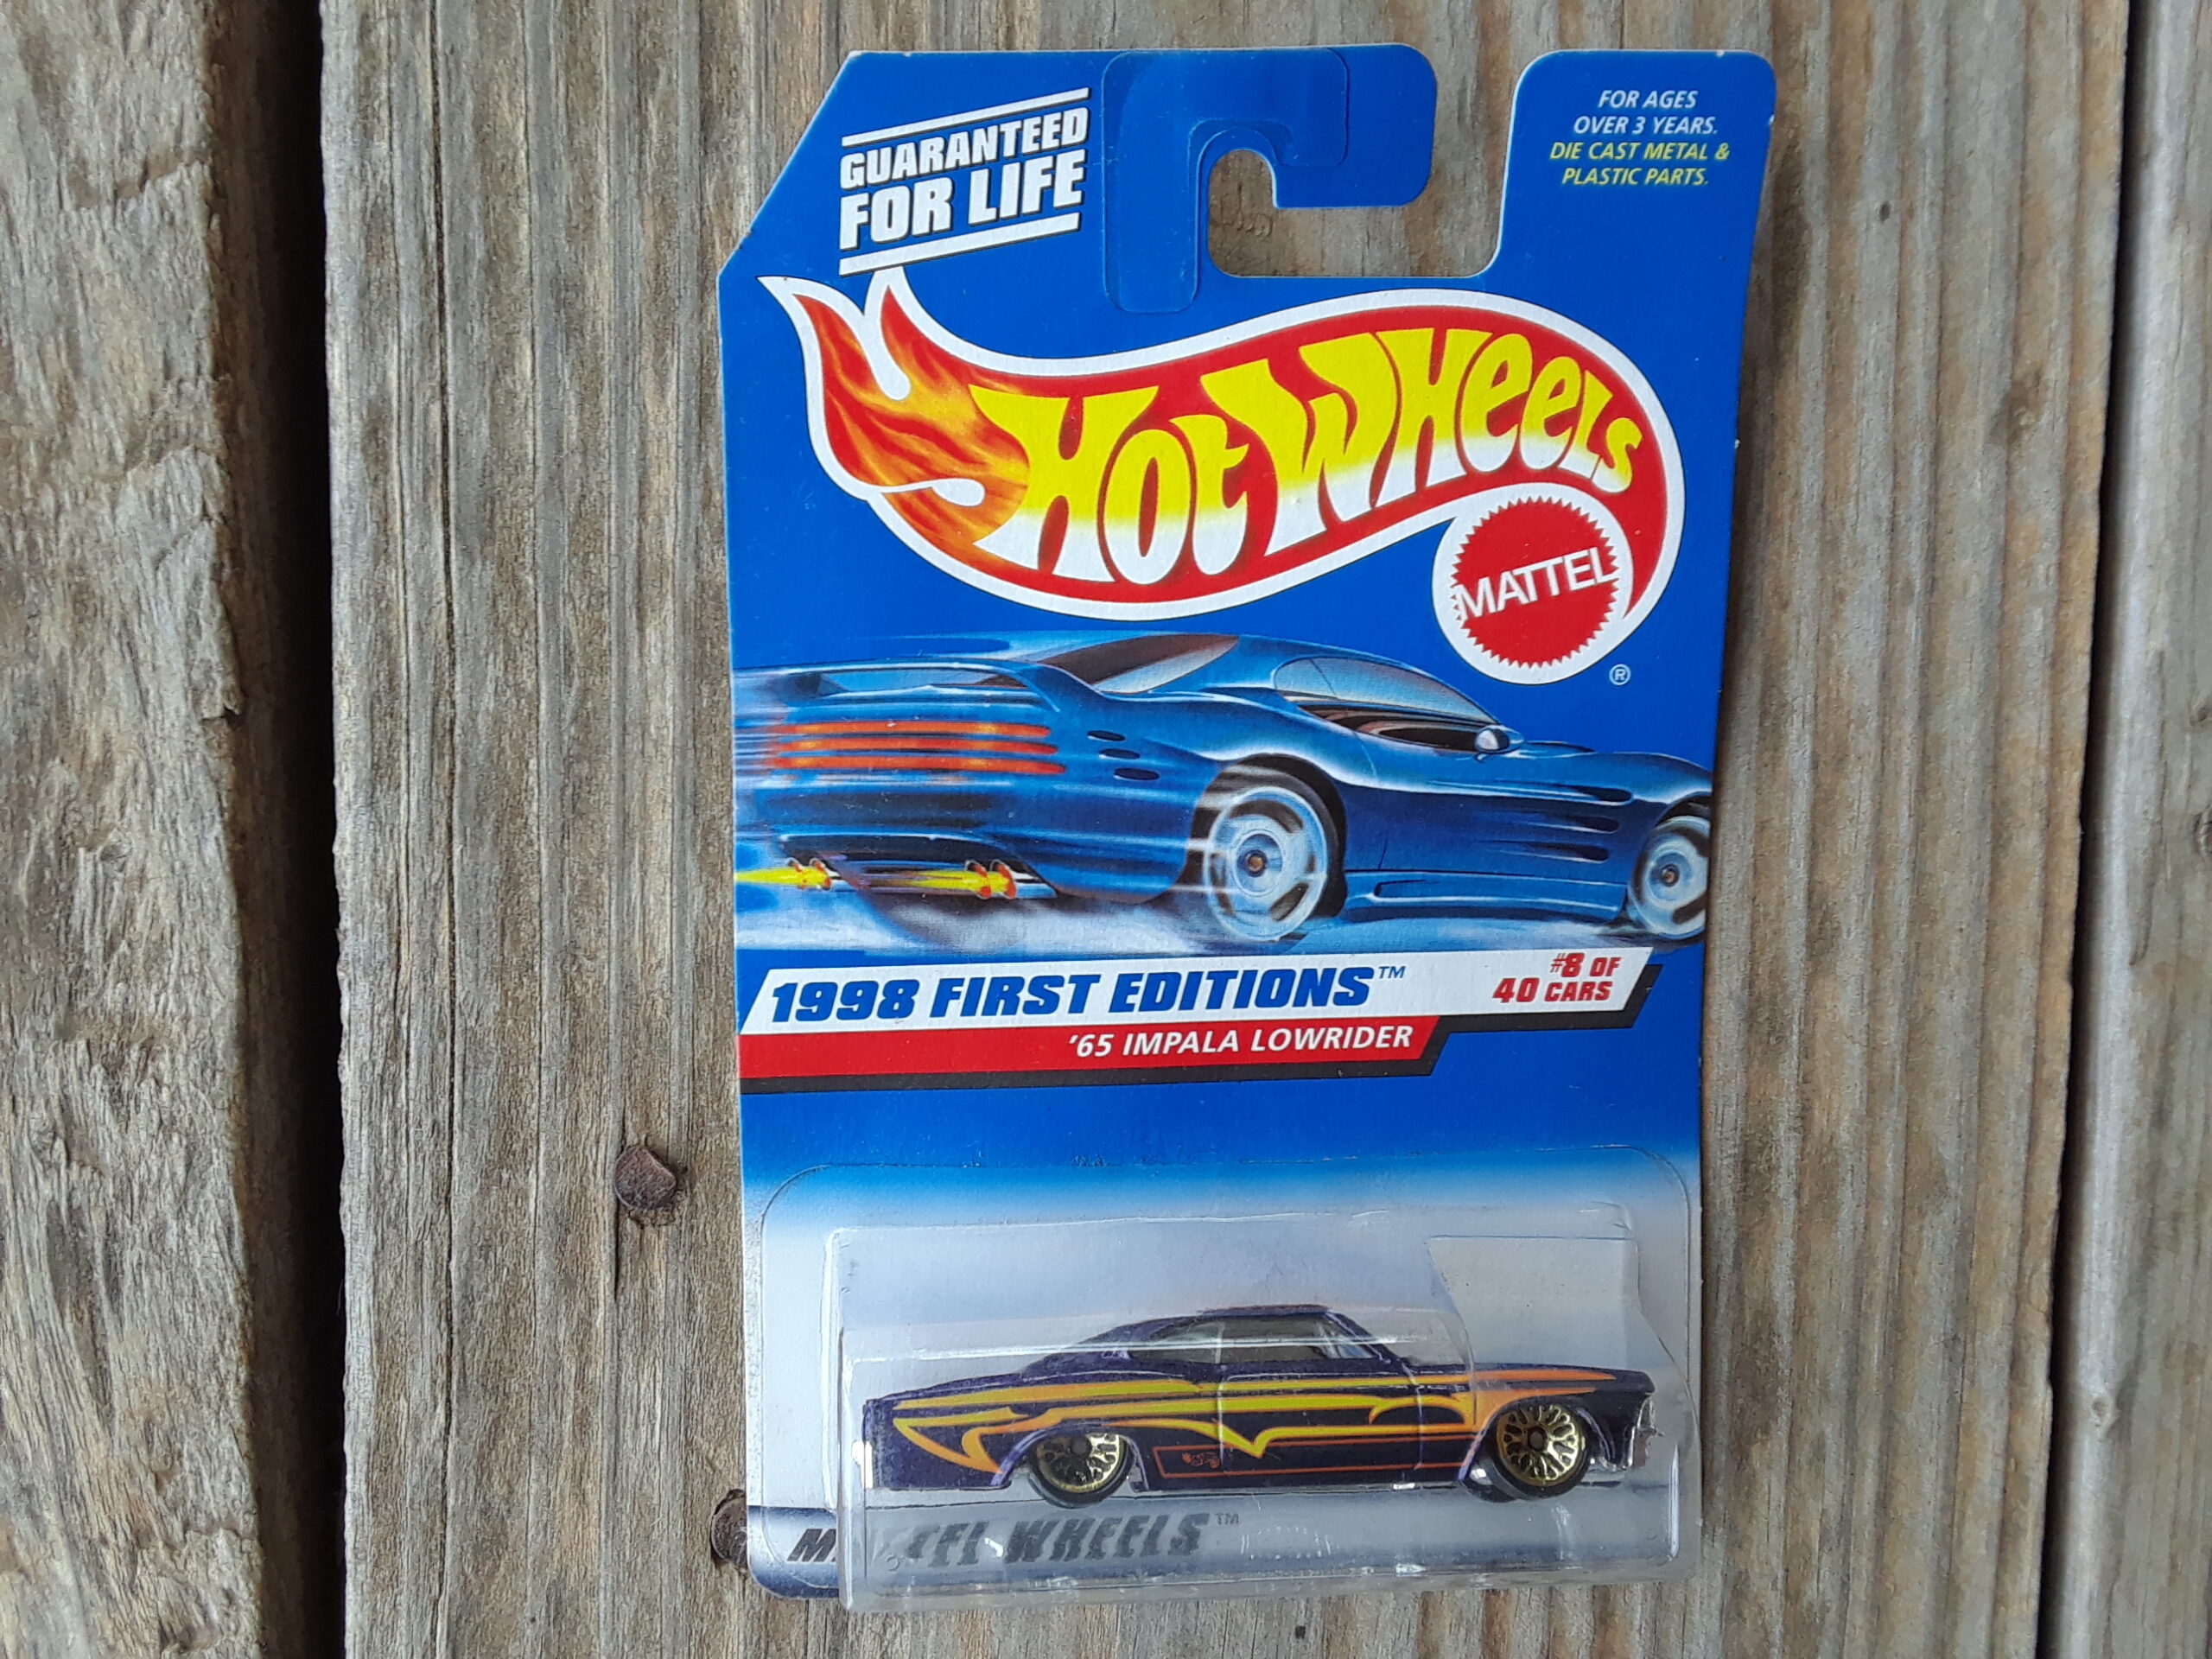 Hot Wheels 1998 First Editions 65 Impala Lowrider